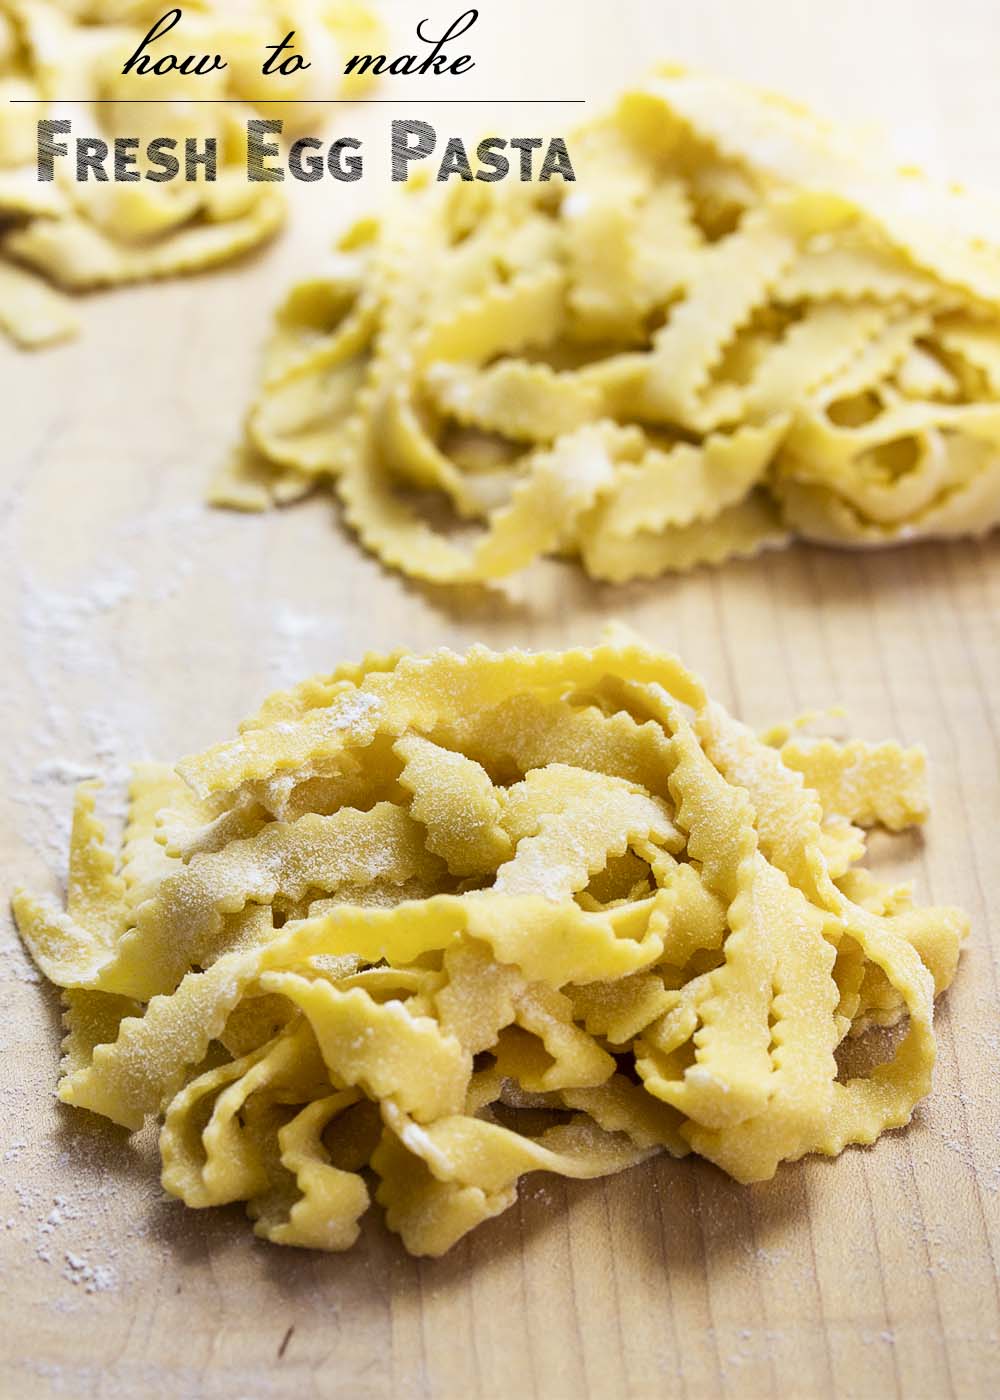 How to Make Fresh Egg Pasta - A Step by Step Guide